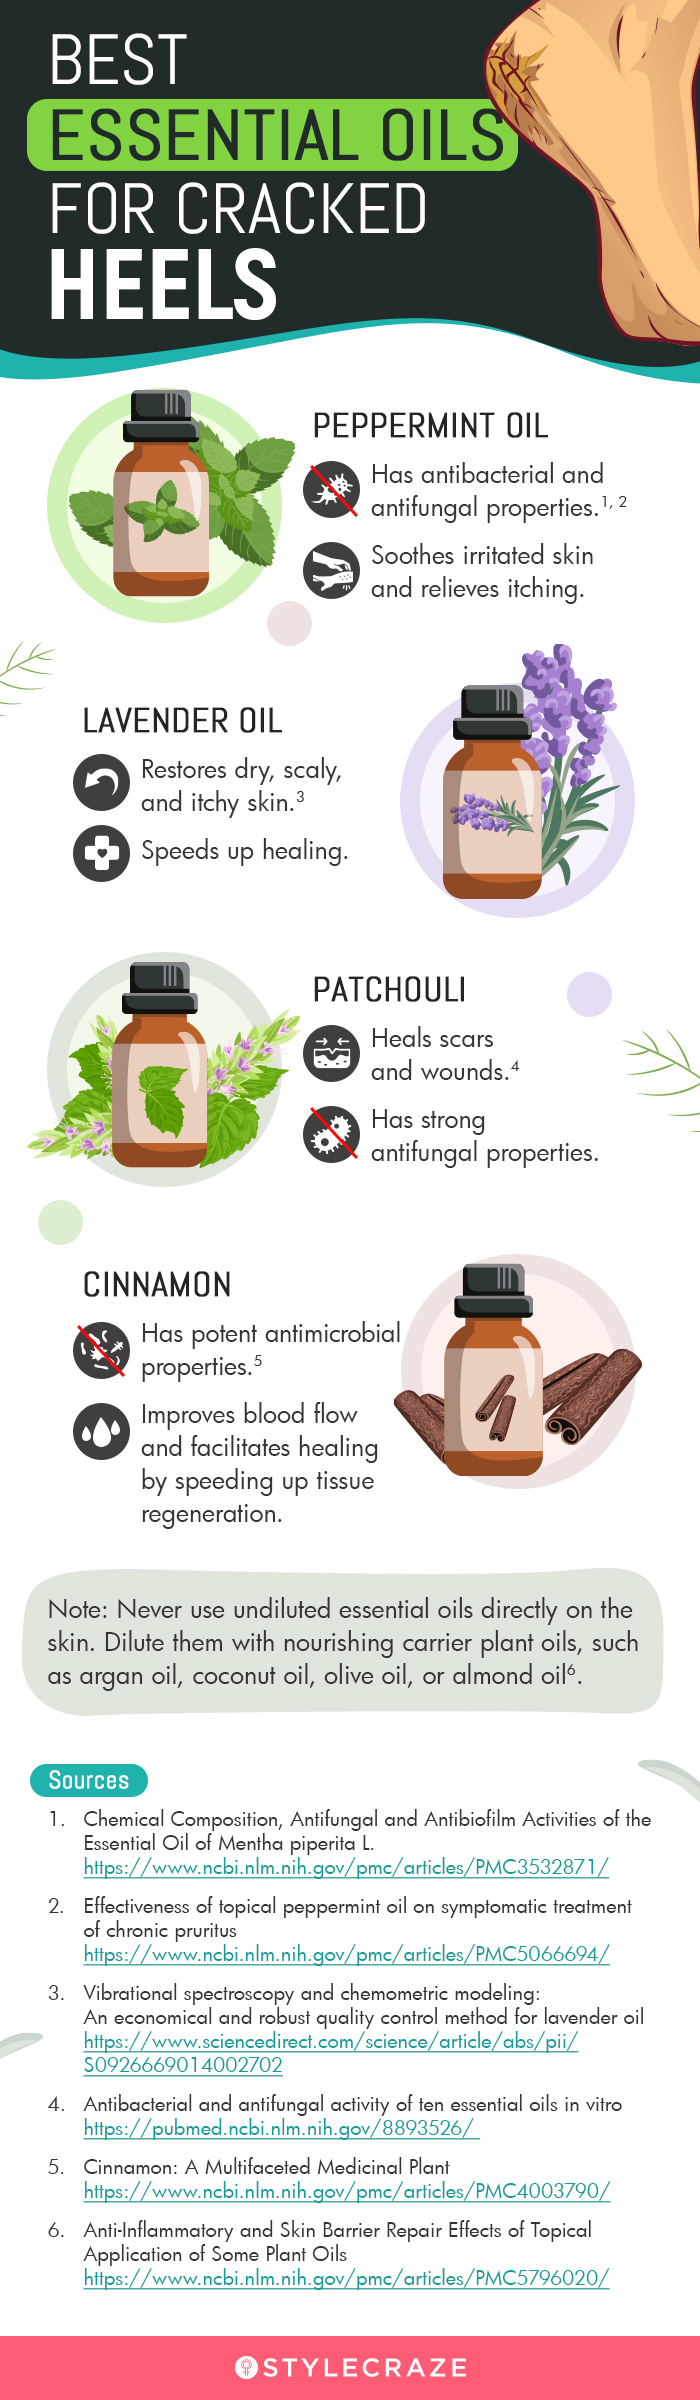 essential oils for cracked heels [infographic]